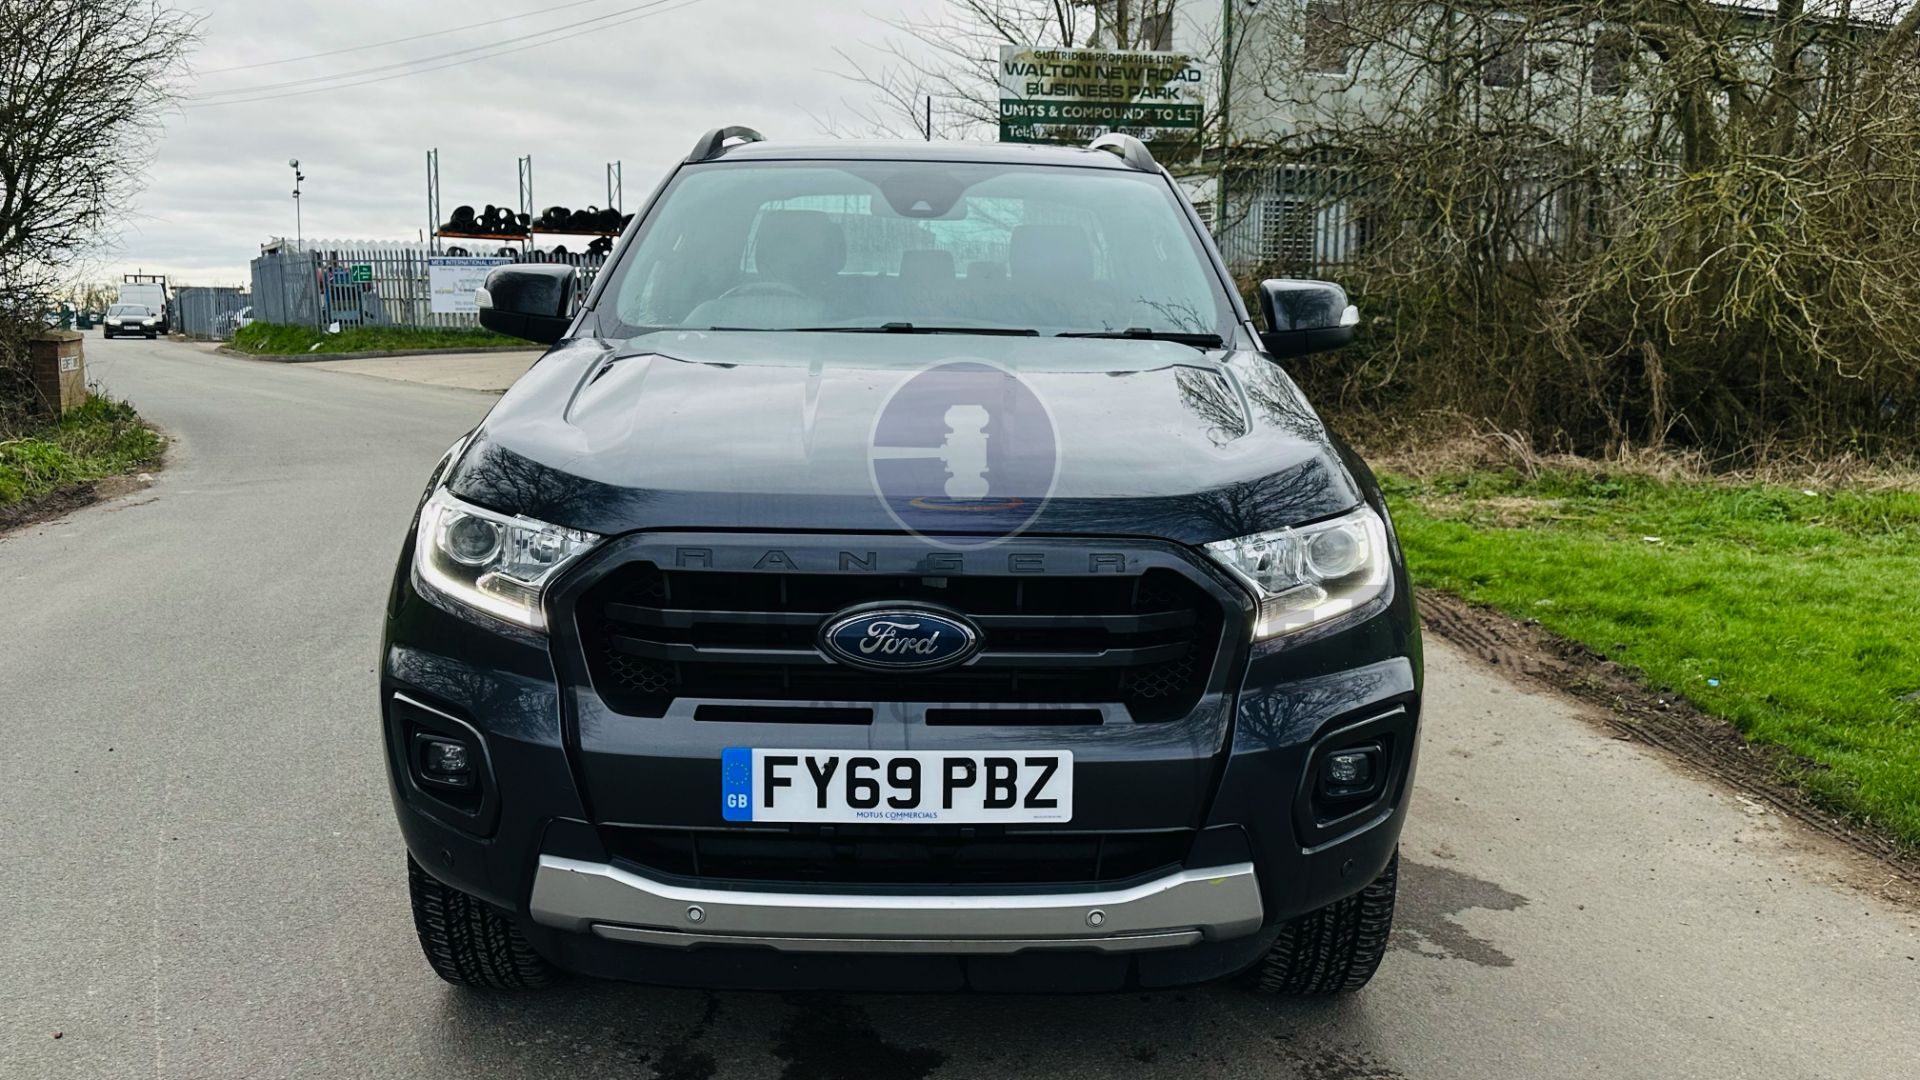 FORD RANGER *WILDTRAK EDITION* DOUBLE CAB PICK-UP (2020 - EURO 6) 3.2 TDCI - AUTOMATIC *HUGE SPEC* - Image 4 of 49